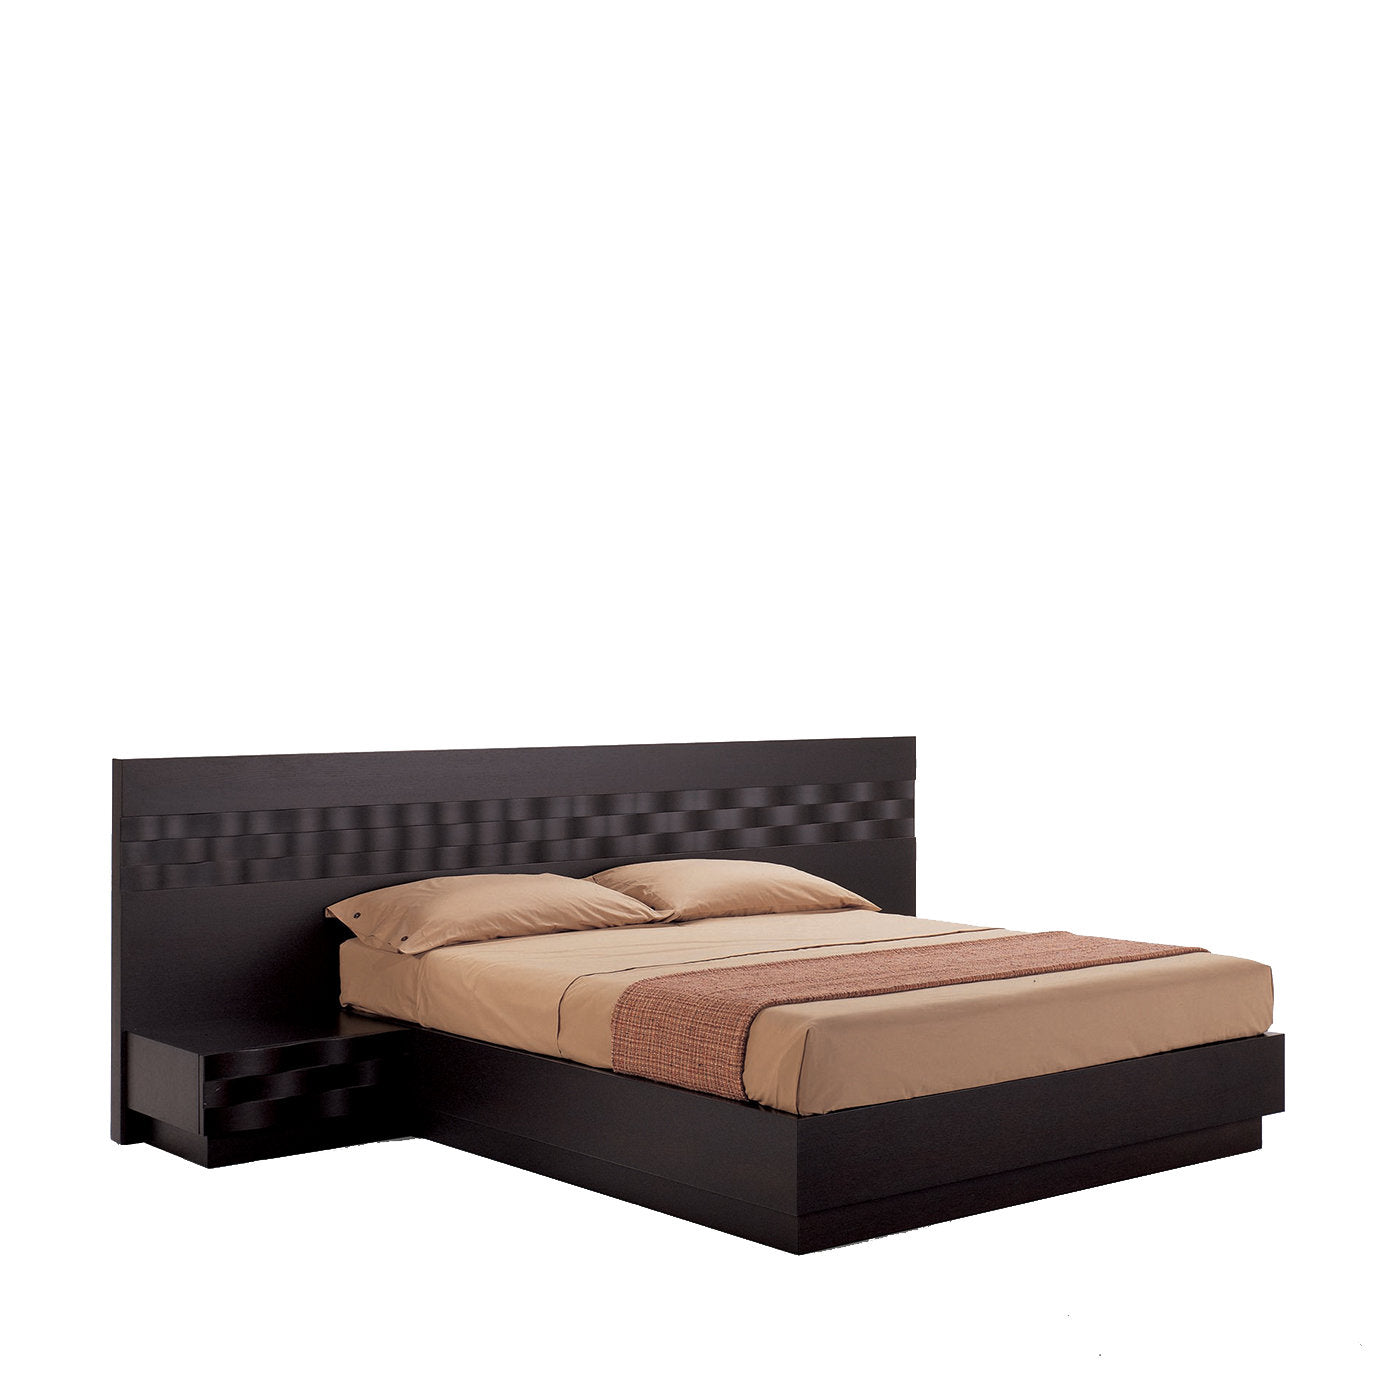 Albert Bed Frame with Nightstands - Main view